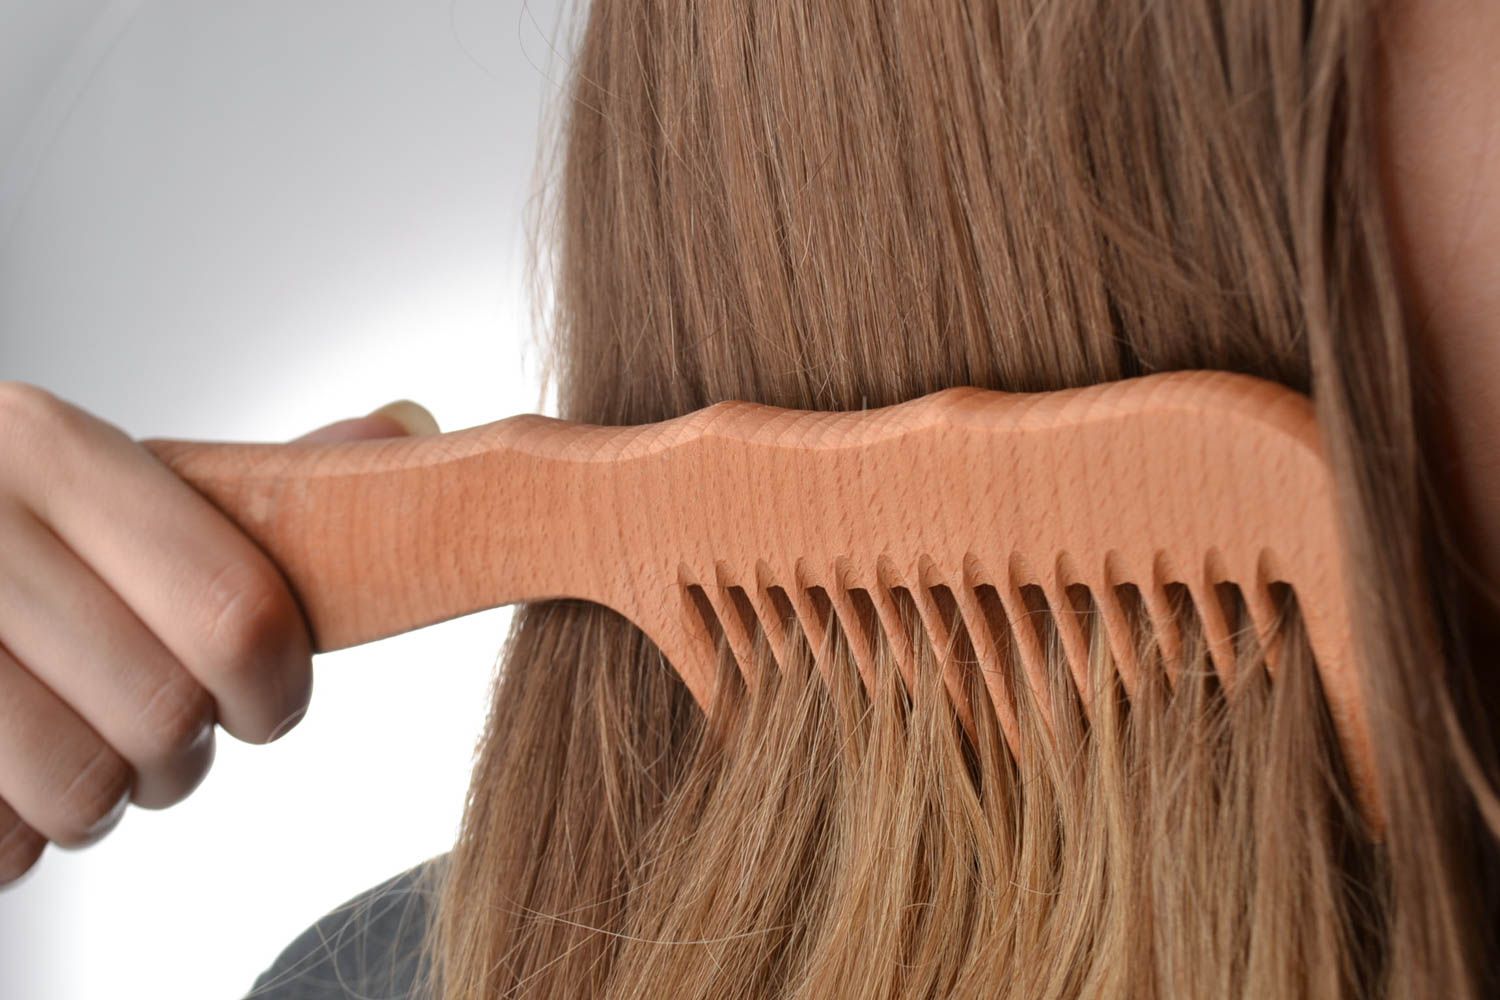 Wooden handmade one-row hair comb made of natural wood covenient accessory photo 1